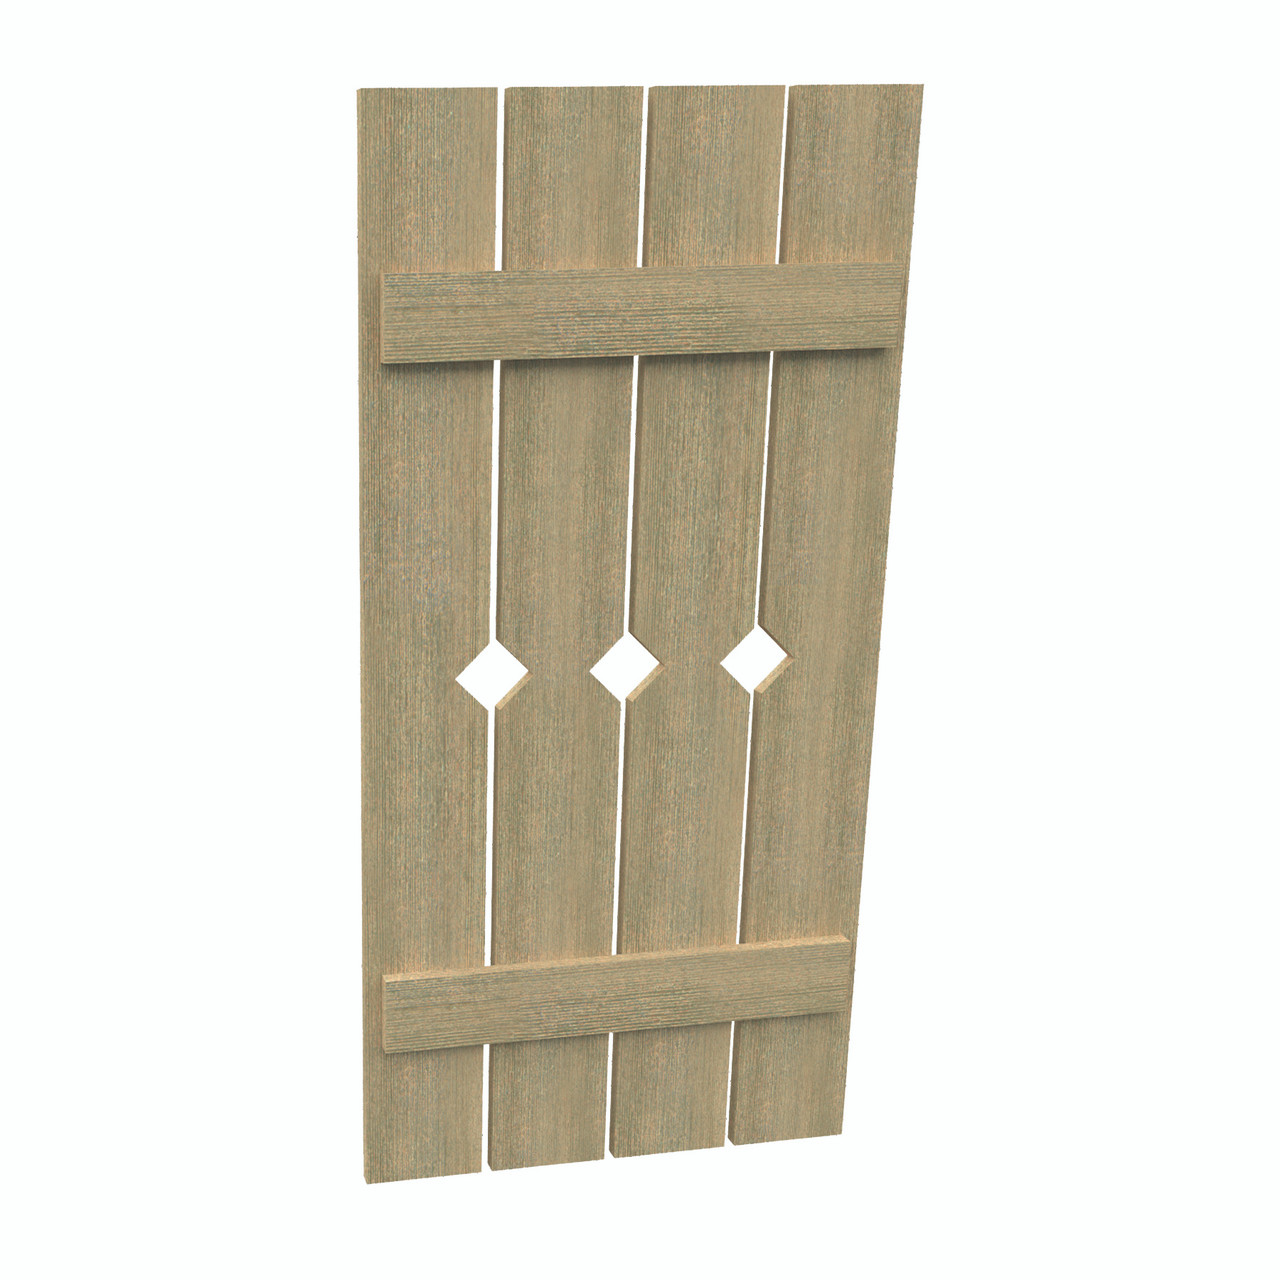 24 inch by 60 inch Plank Shutter with 4-Plank, Diamond